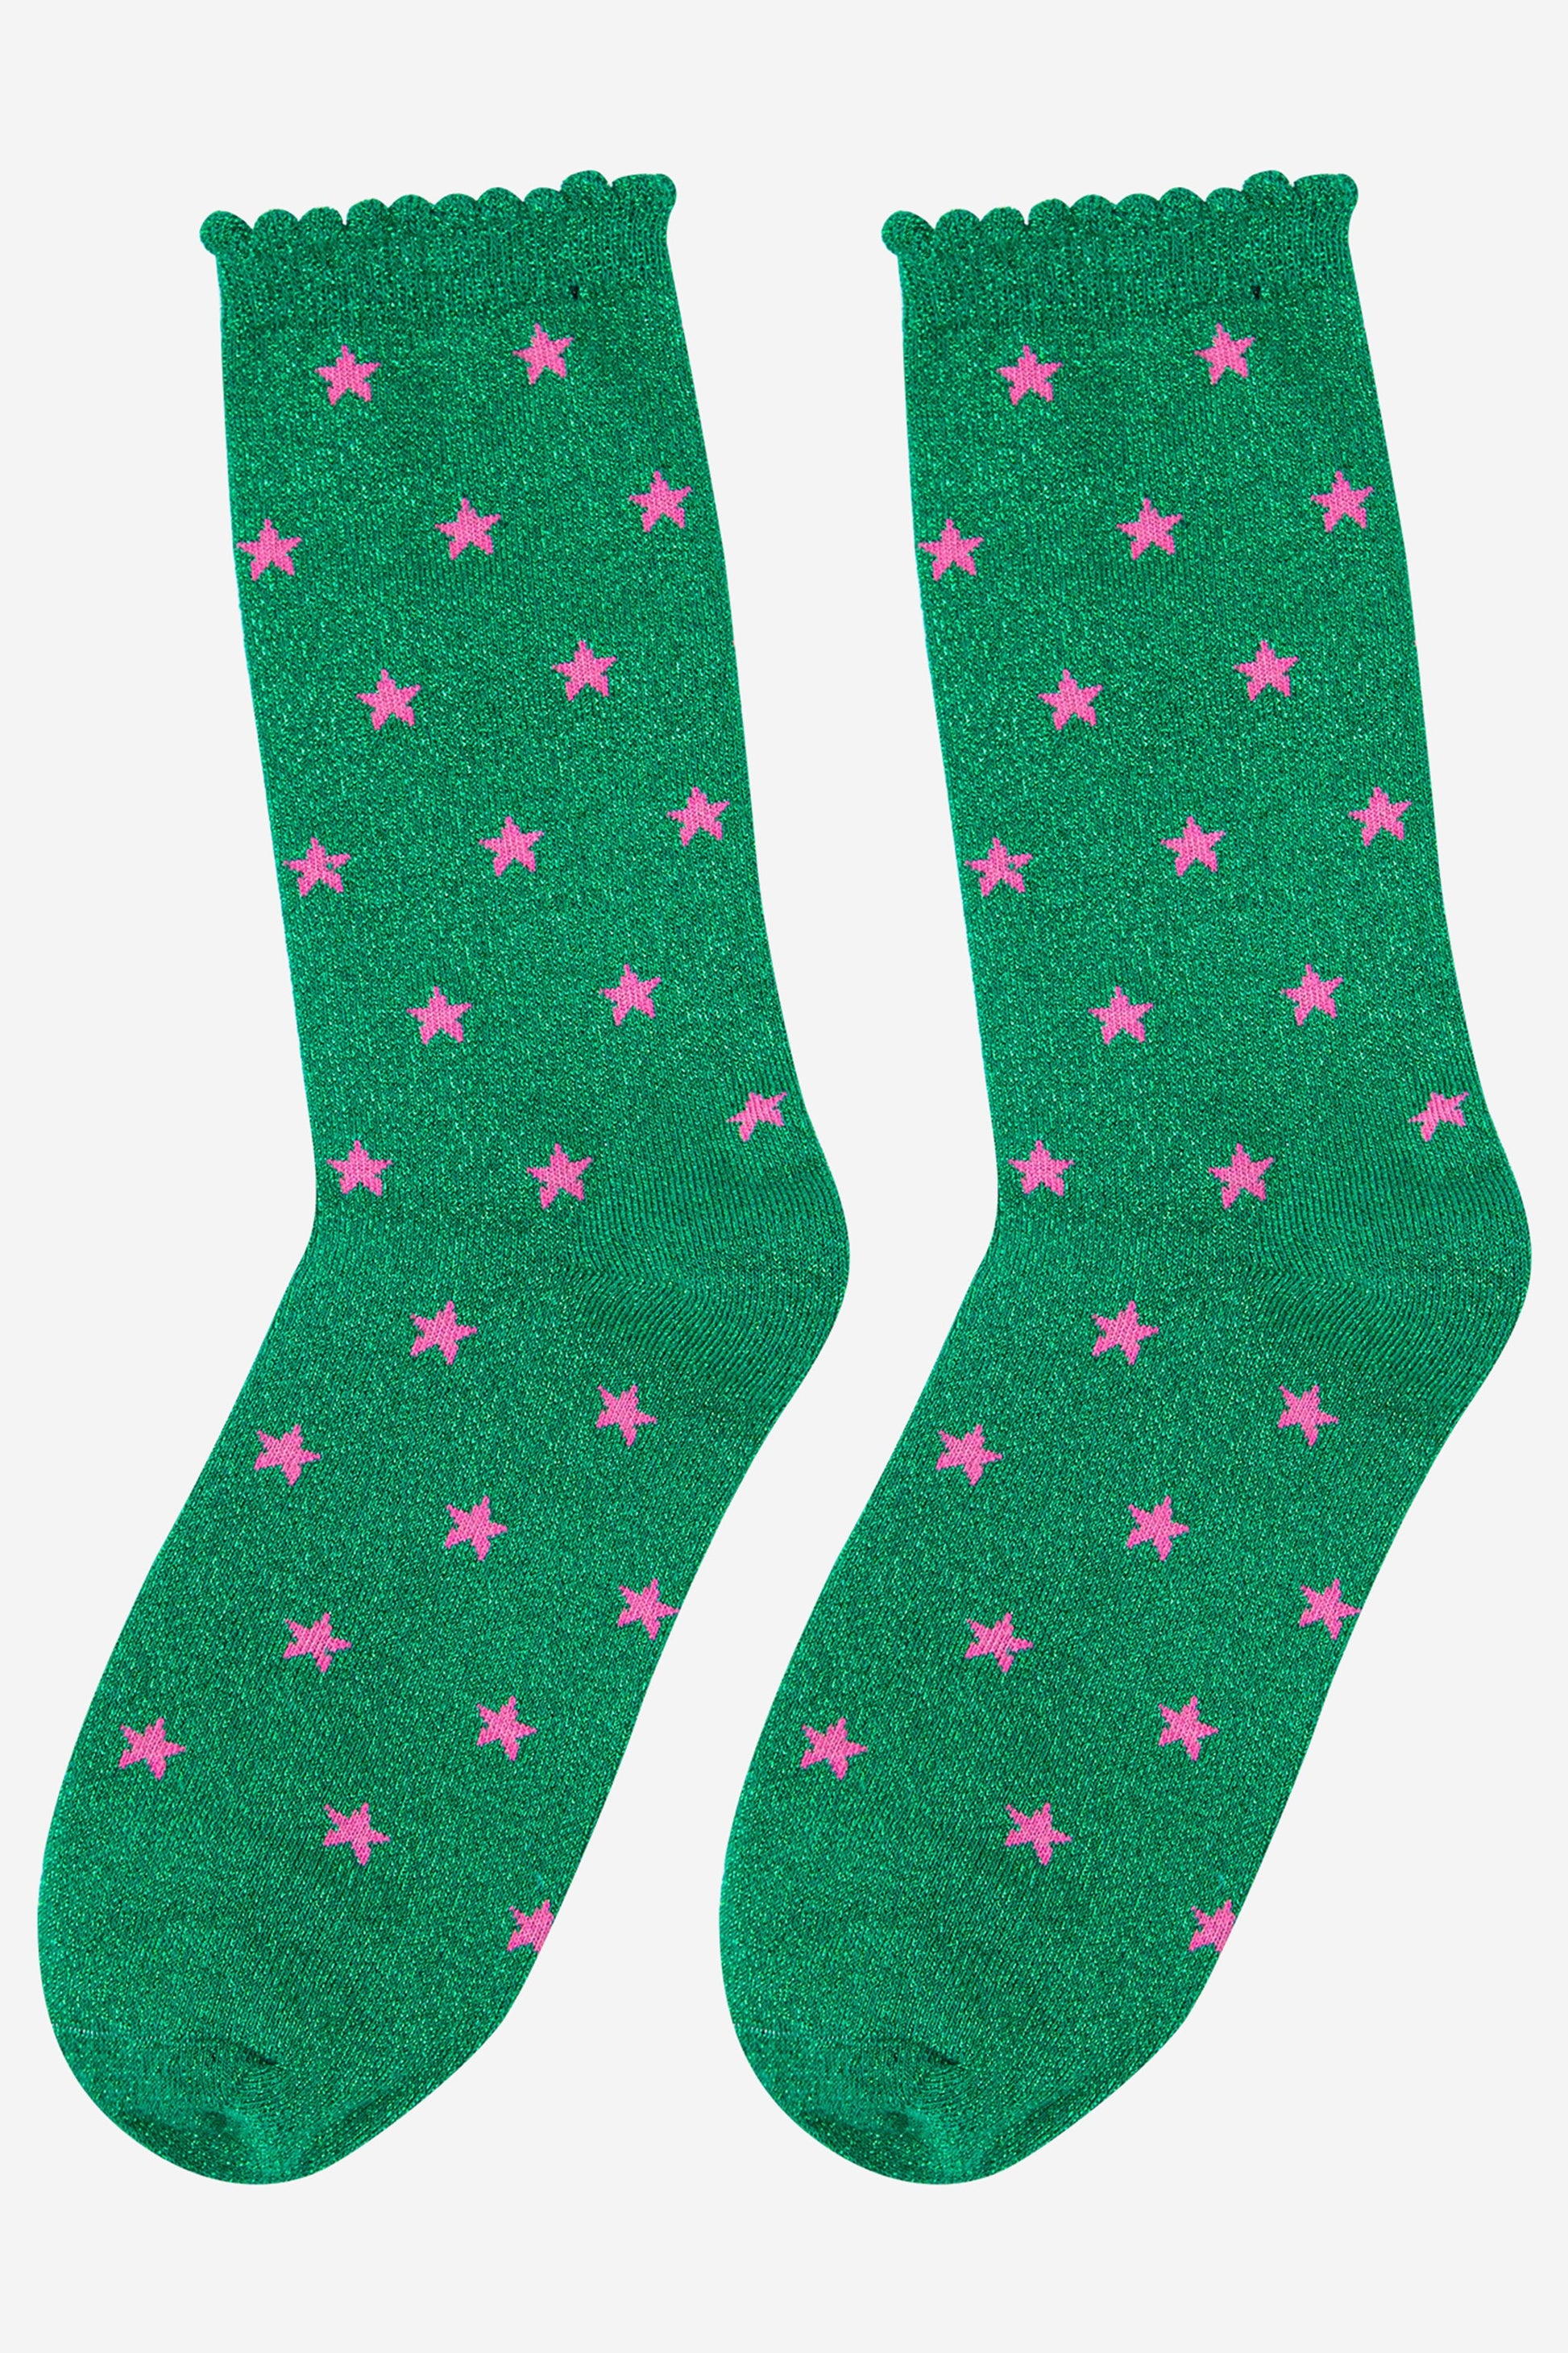 green glitter ankle socks with scalloped edges and an all over pink star pattern